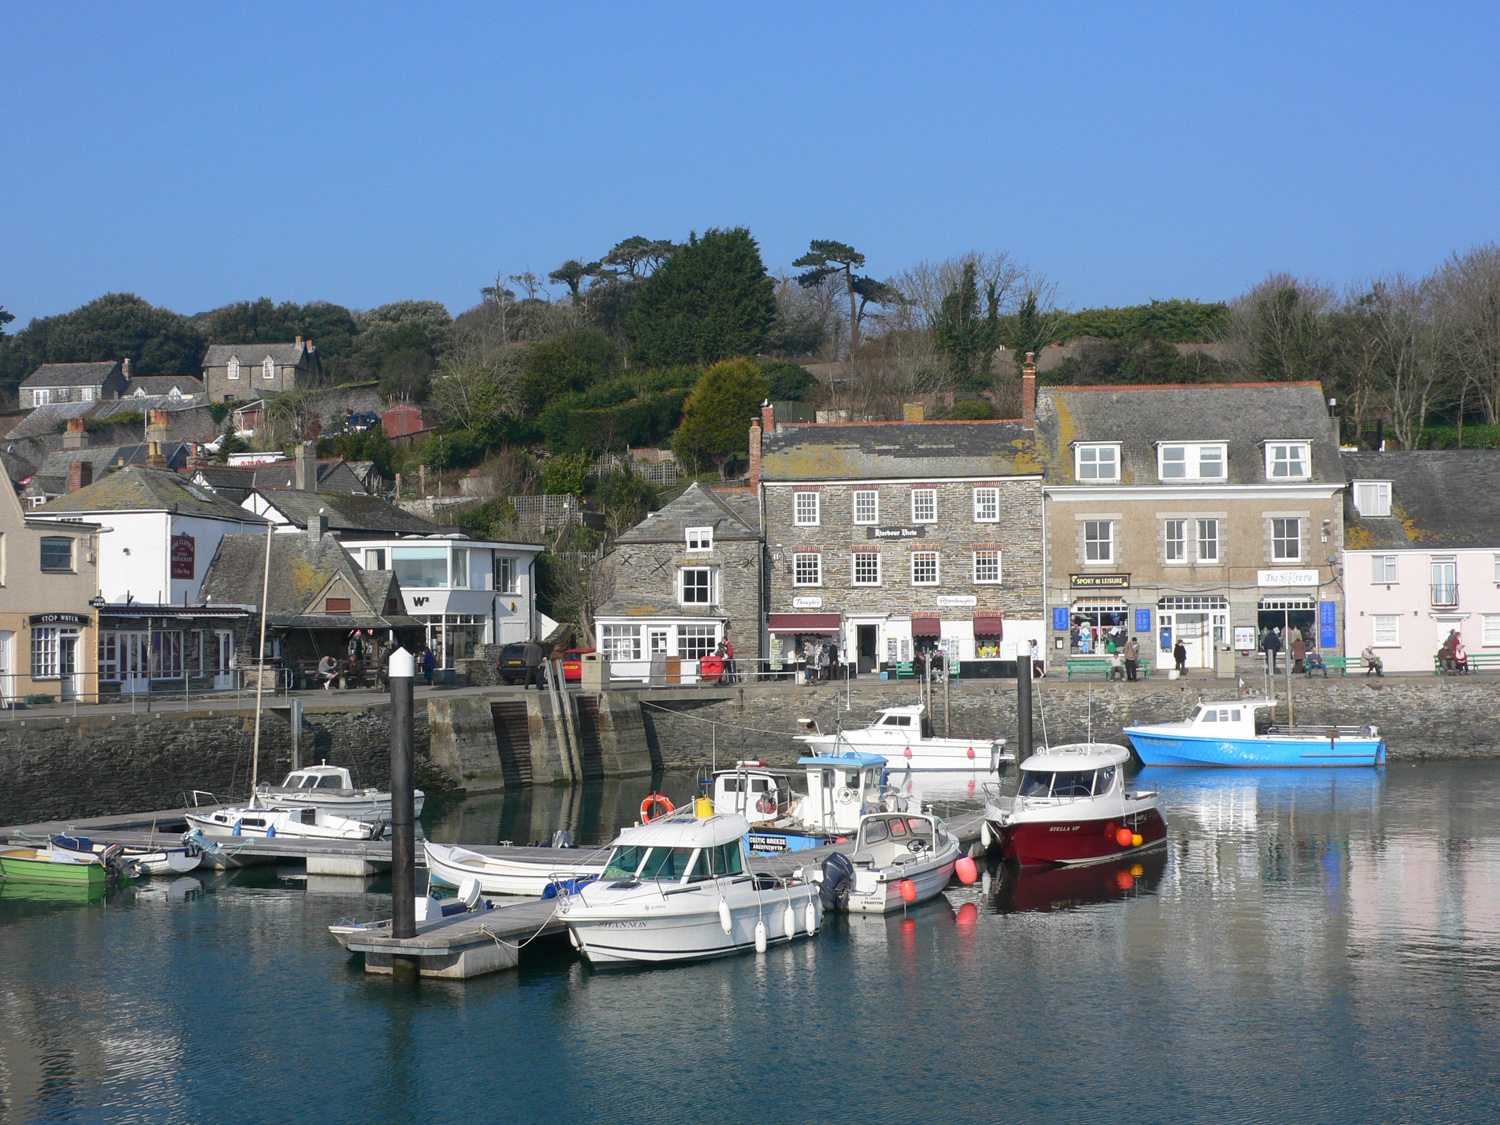 Boats in Padstow harbour